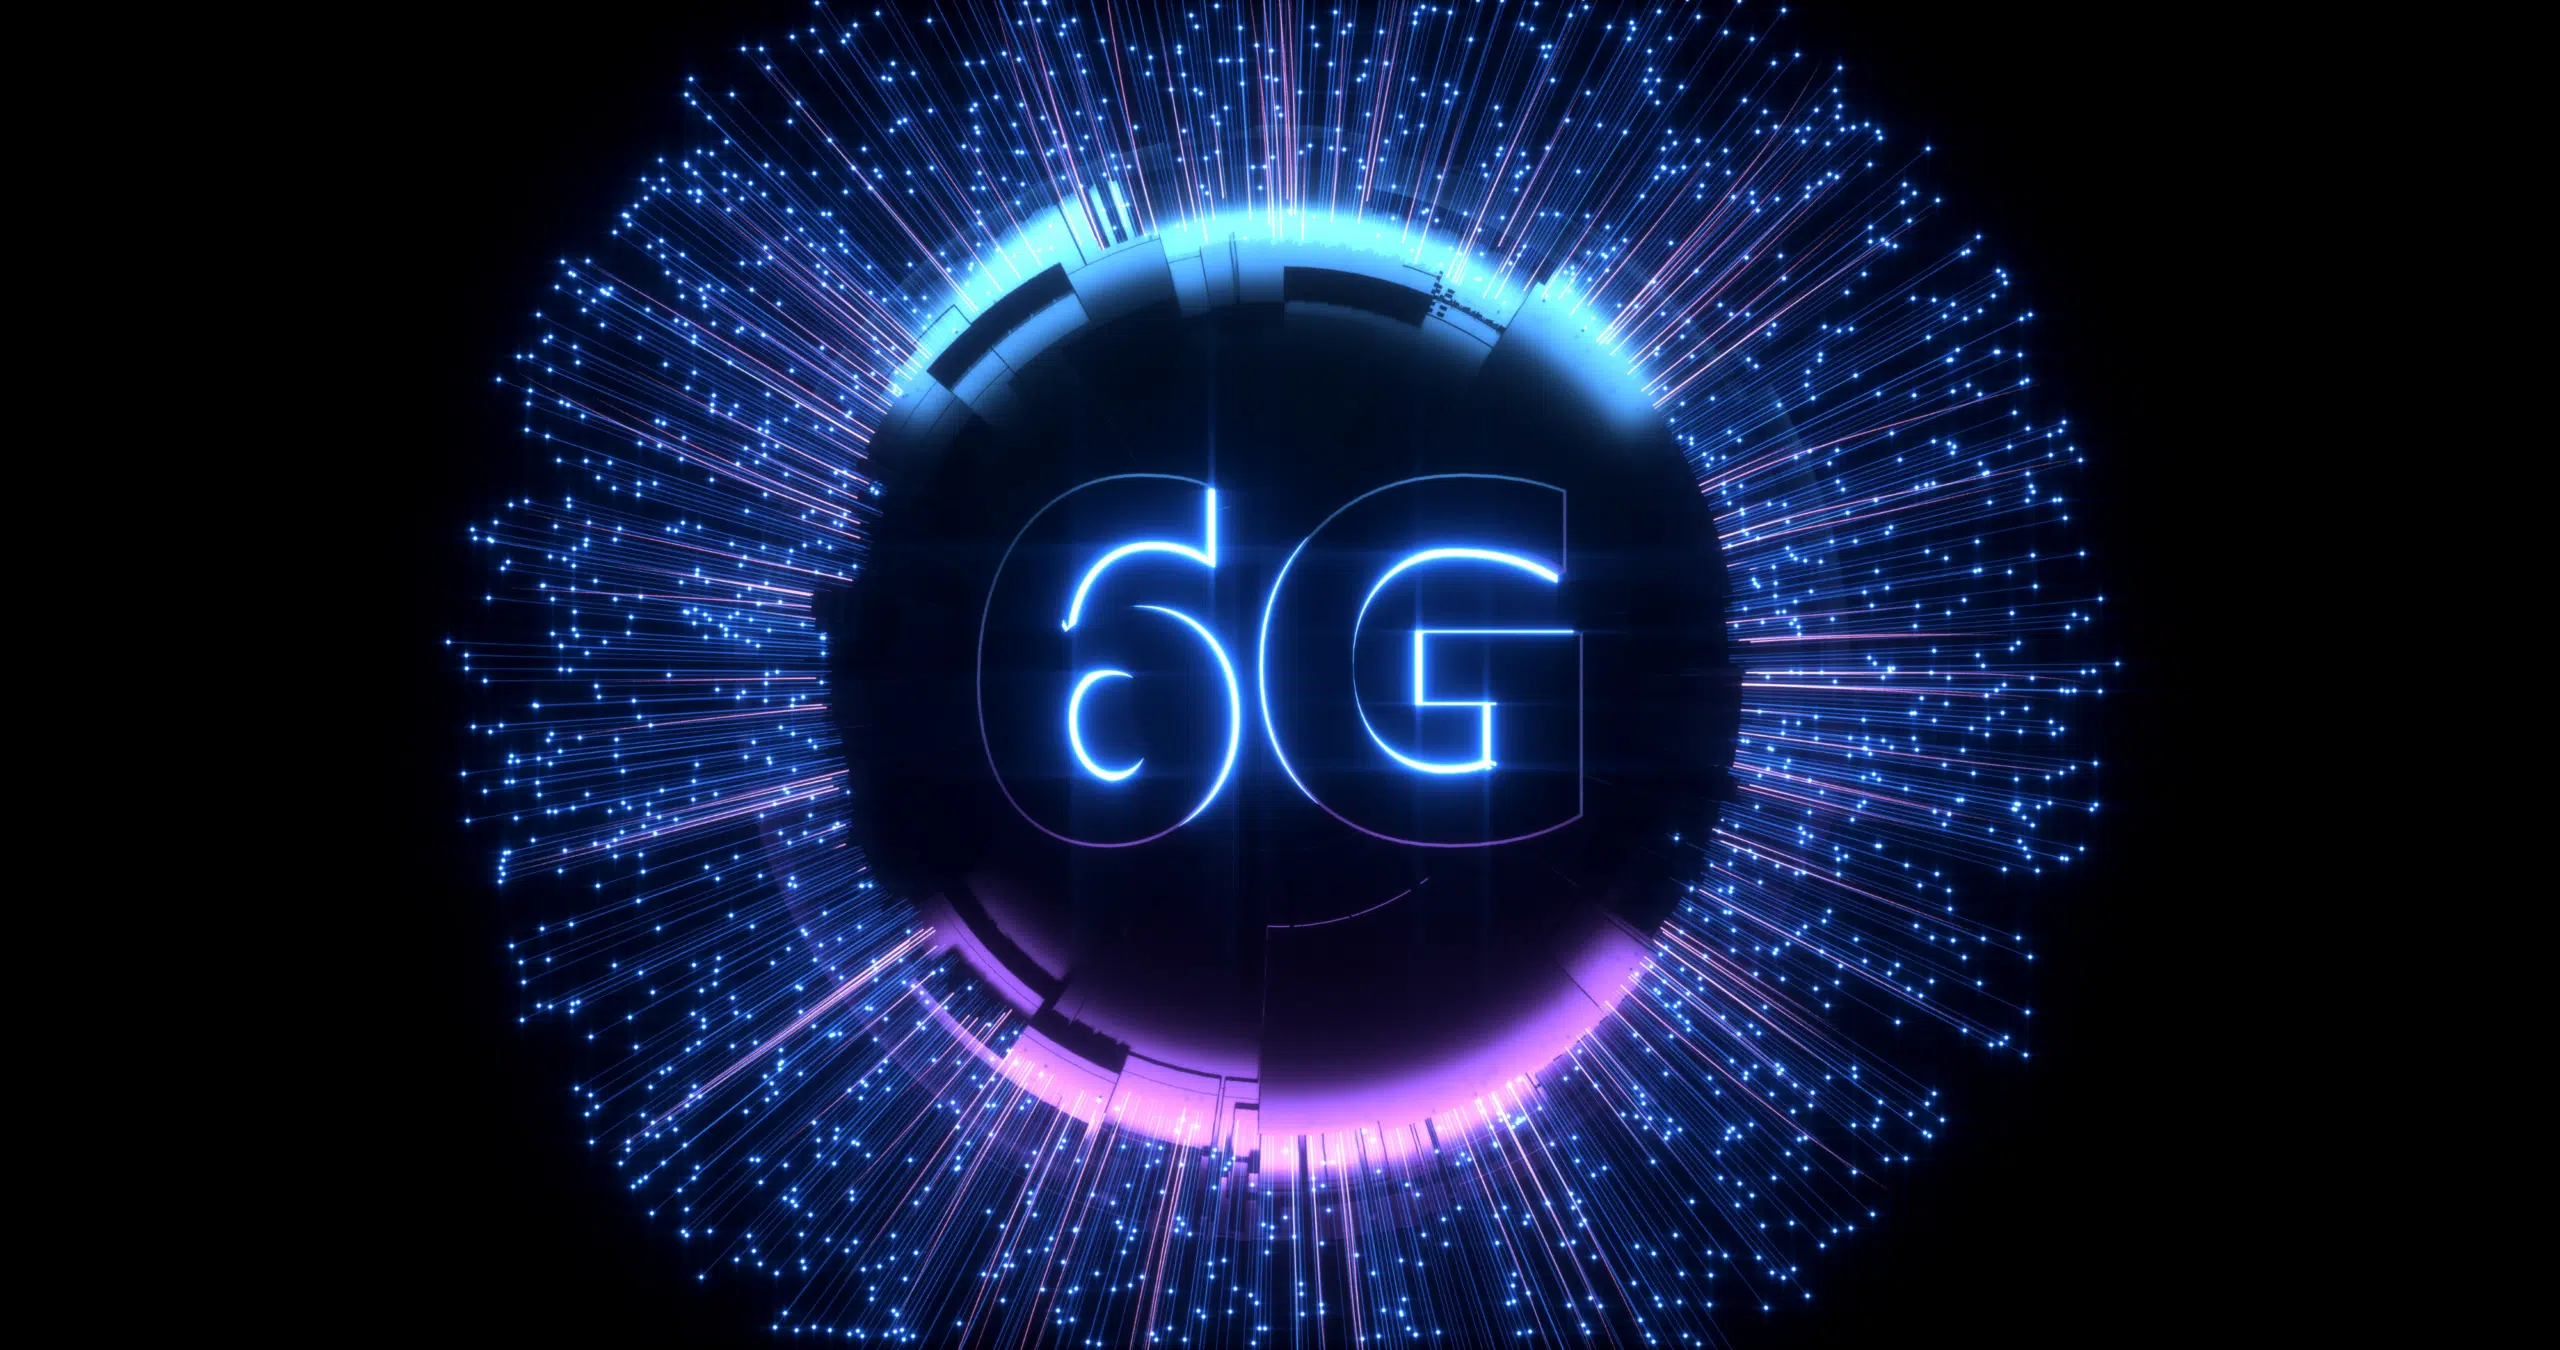 China labs got 100 Gbps Wireless data speed on 6G